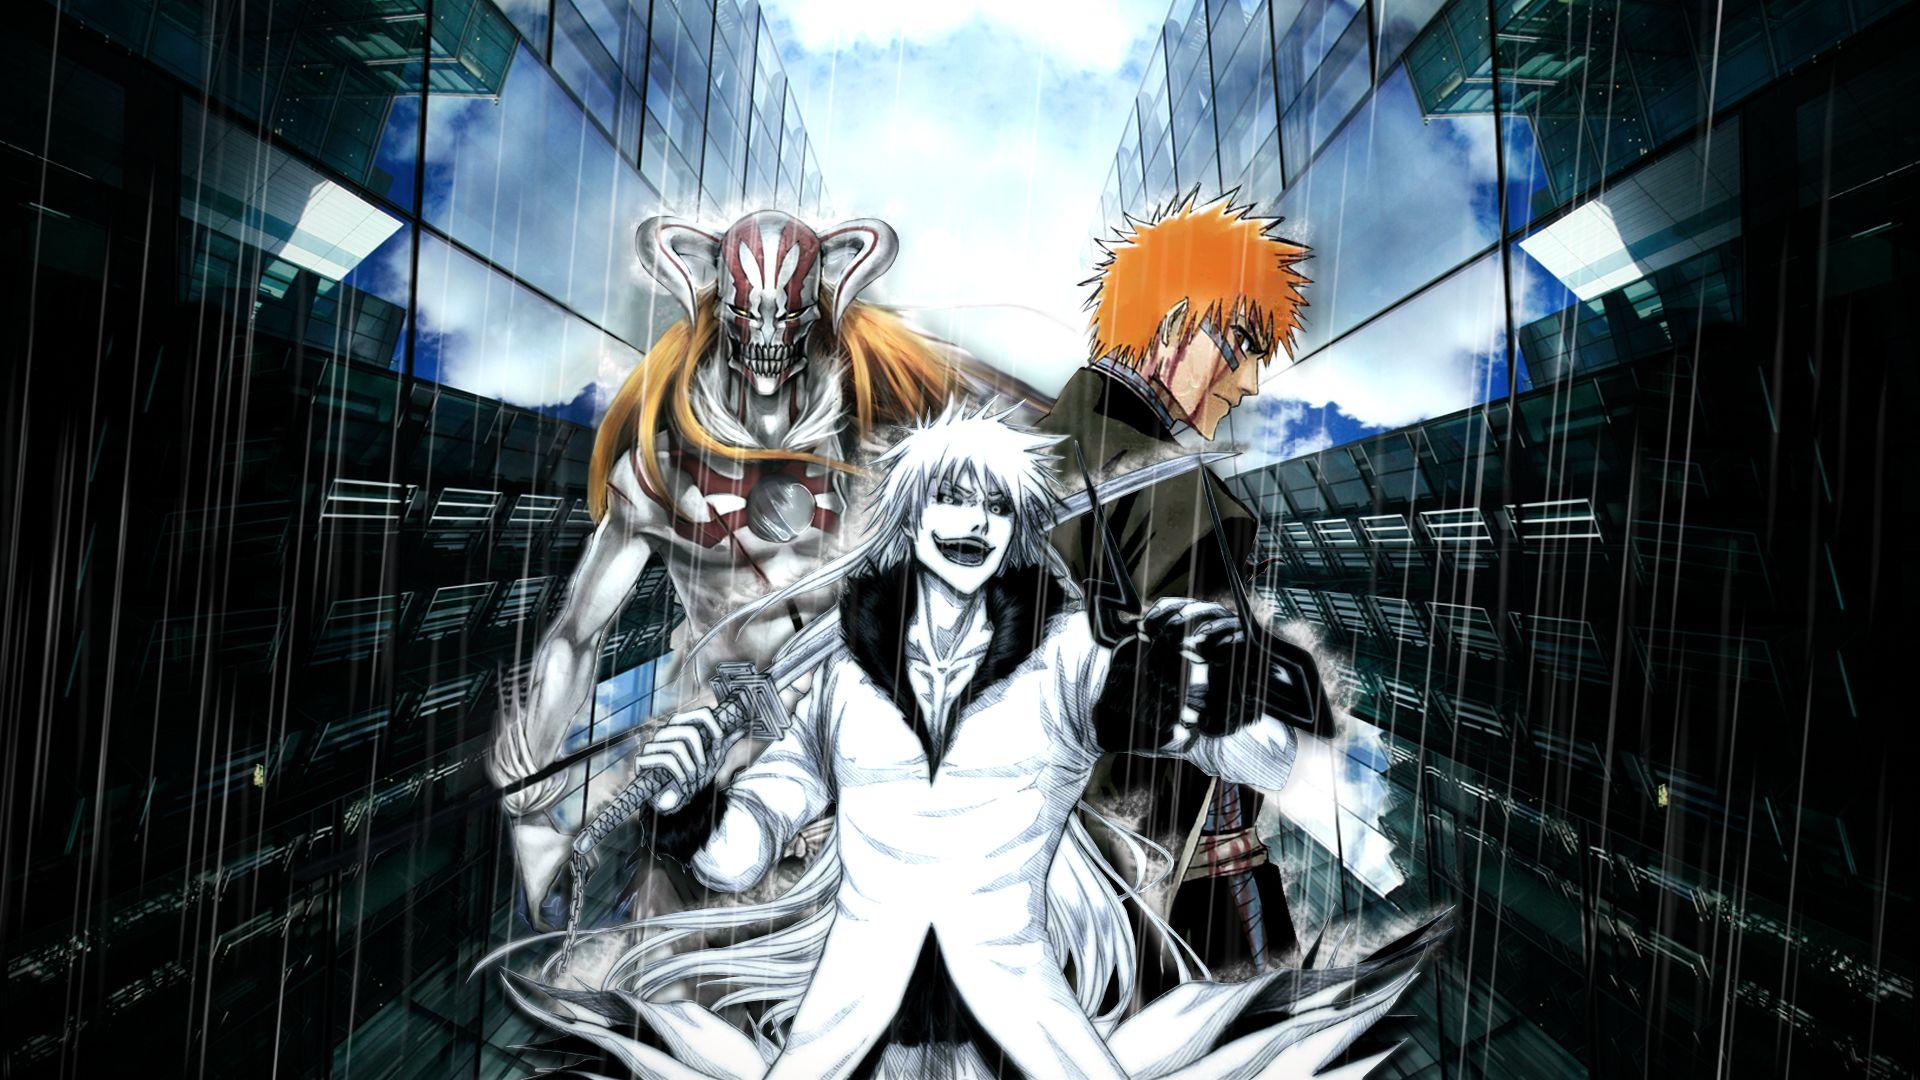 10 Ways The Bleach LiveAction Movie Is Different From The Anime